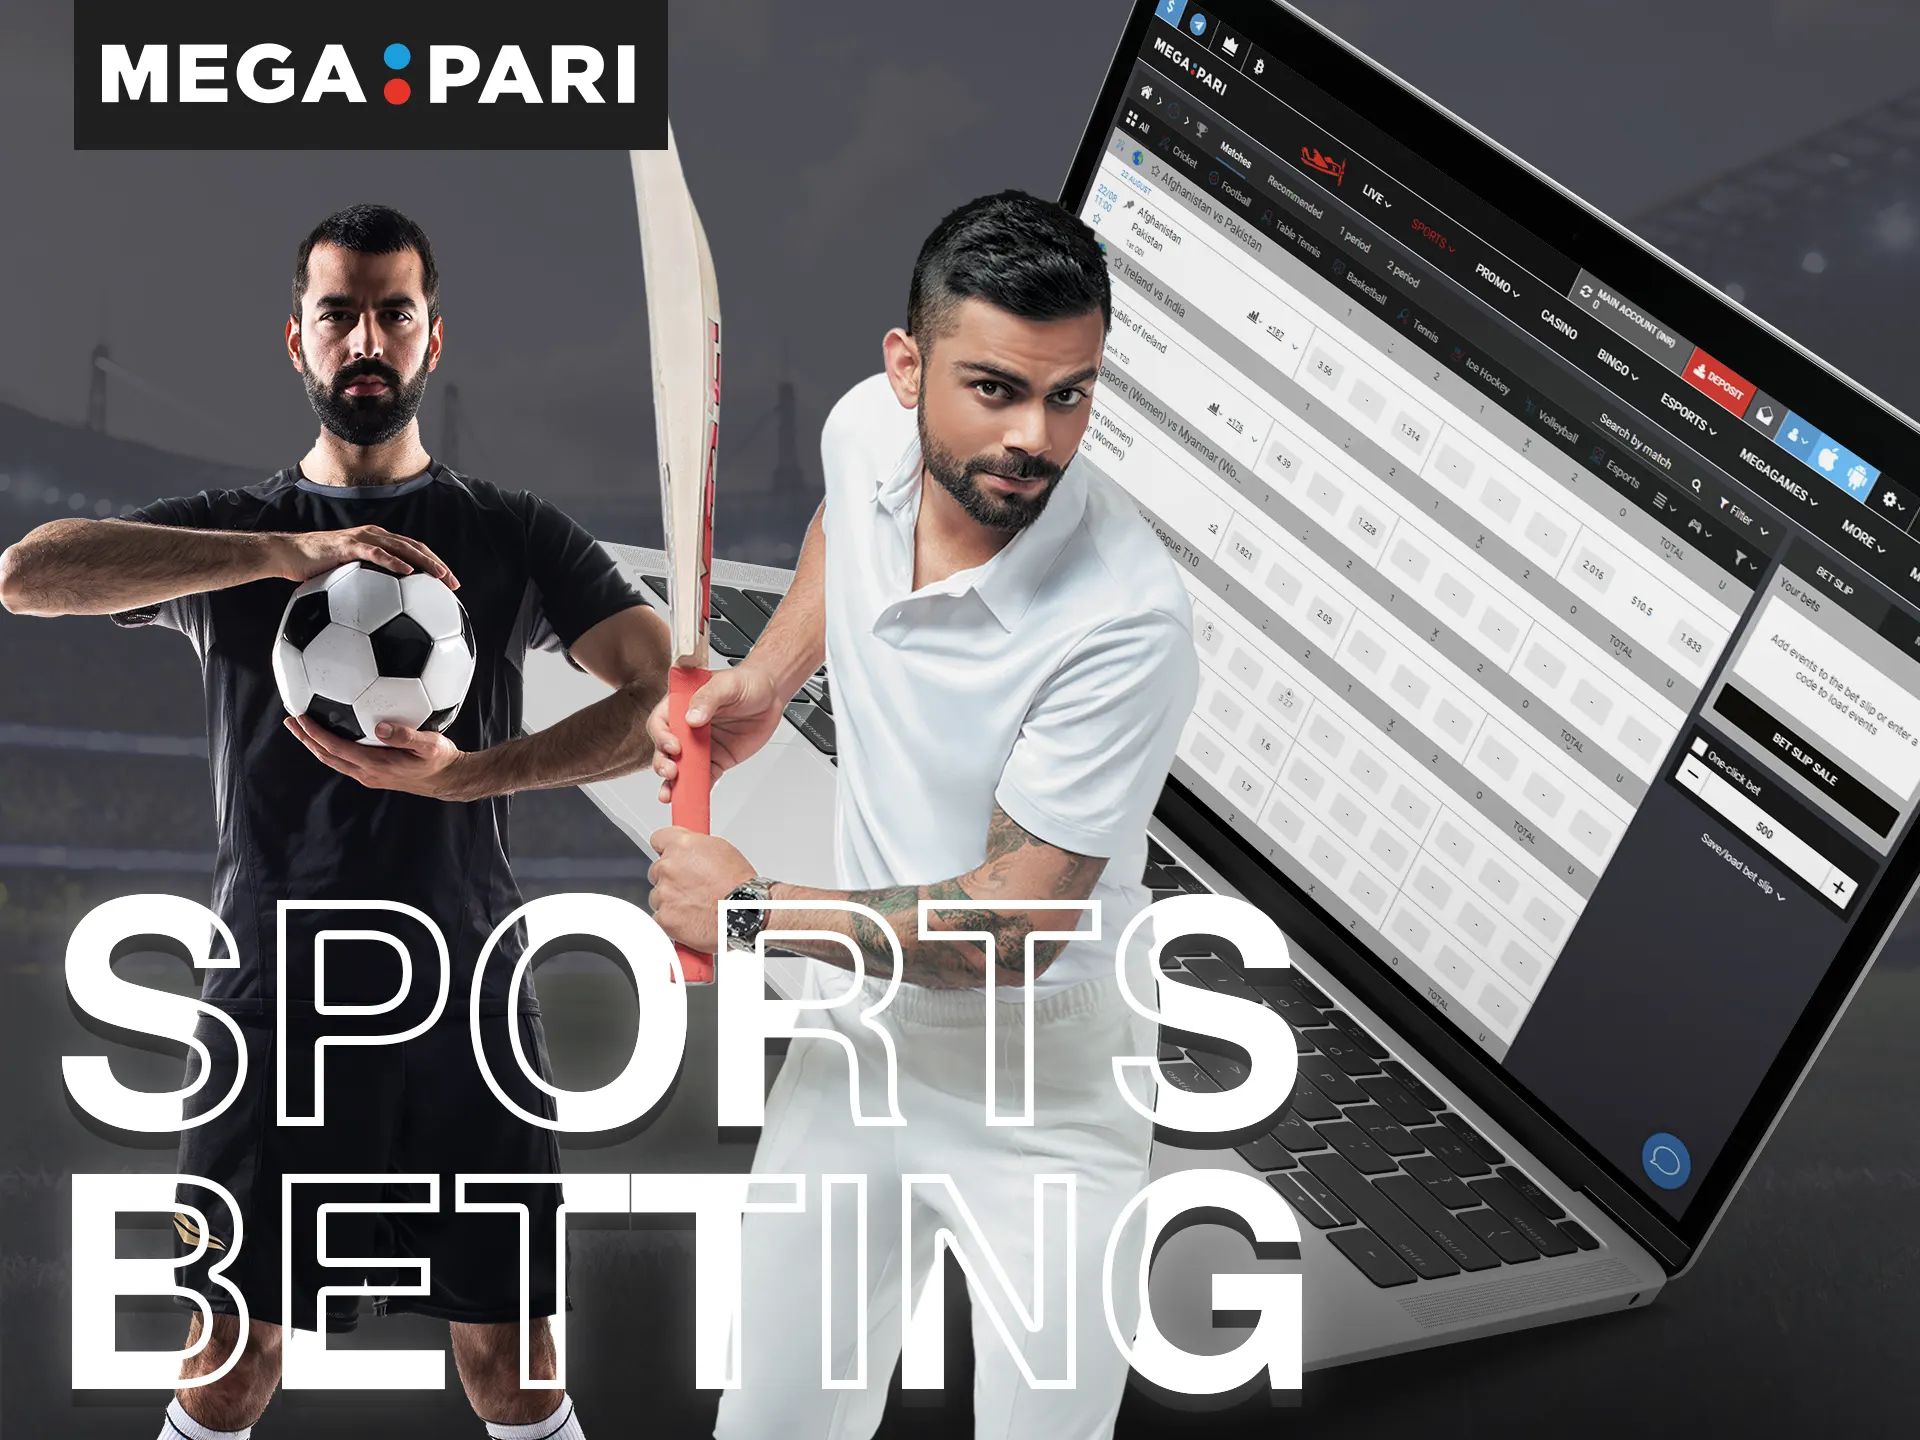 Megapari provides customers with a wide range of opportunities to bet on their favorite sports events.